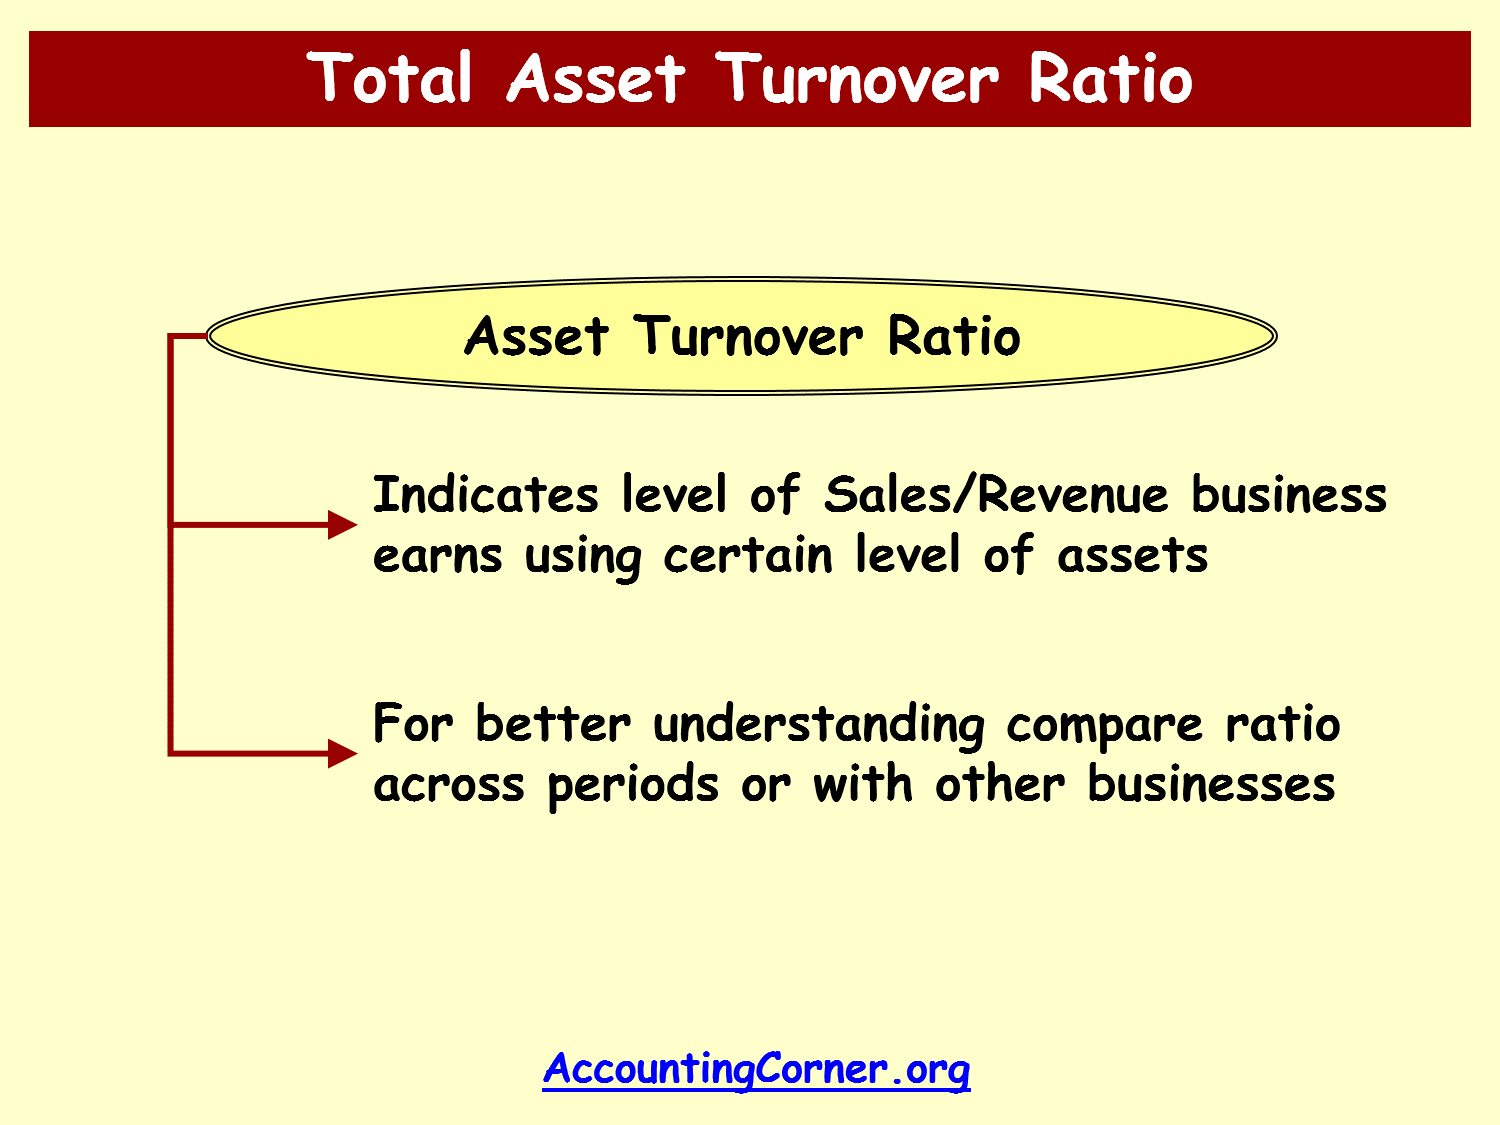 Turn over means. Assets turnover формула. Turnover ratio формула. Total Assets turnover ratio формула. Total Asset turnover формула.